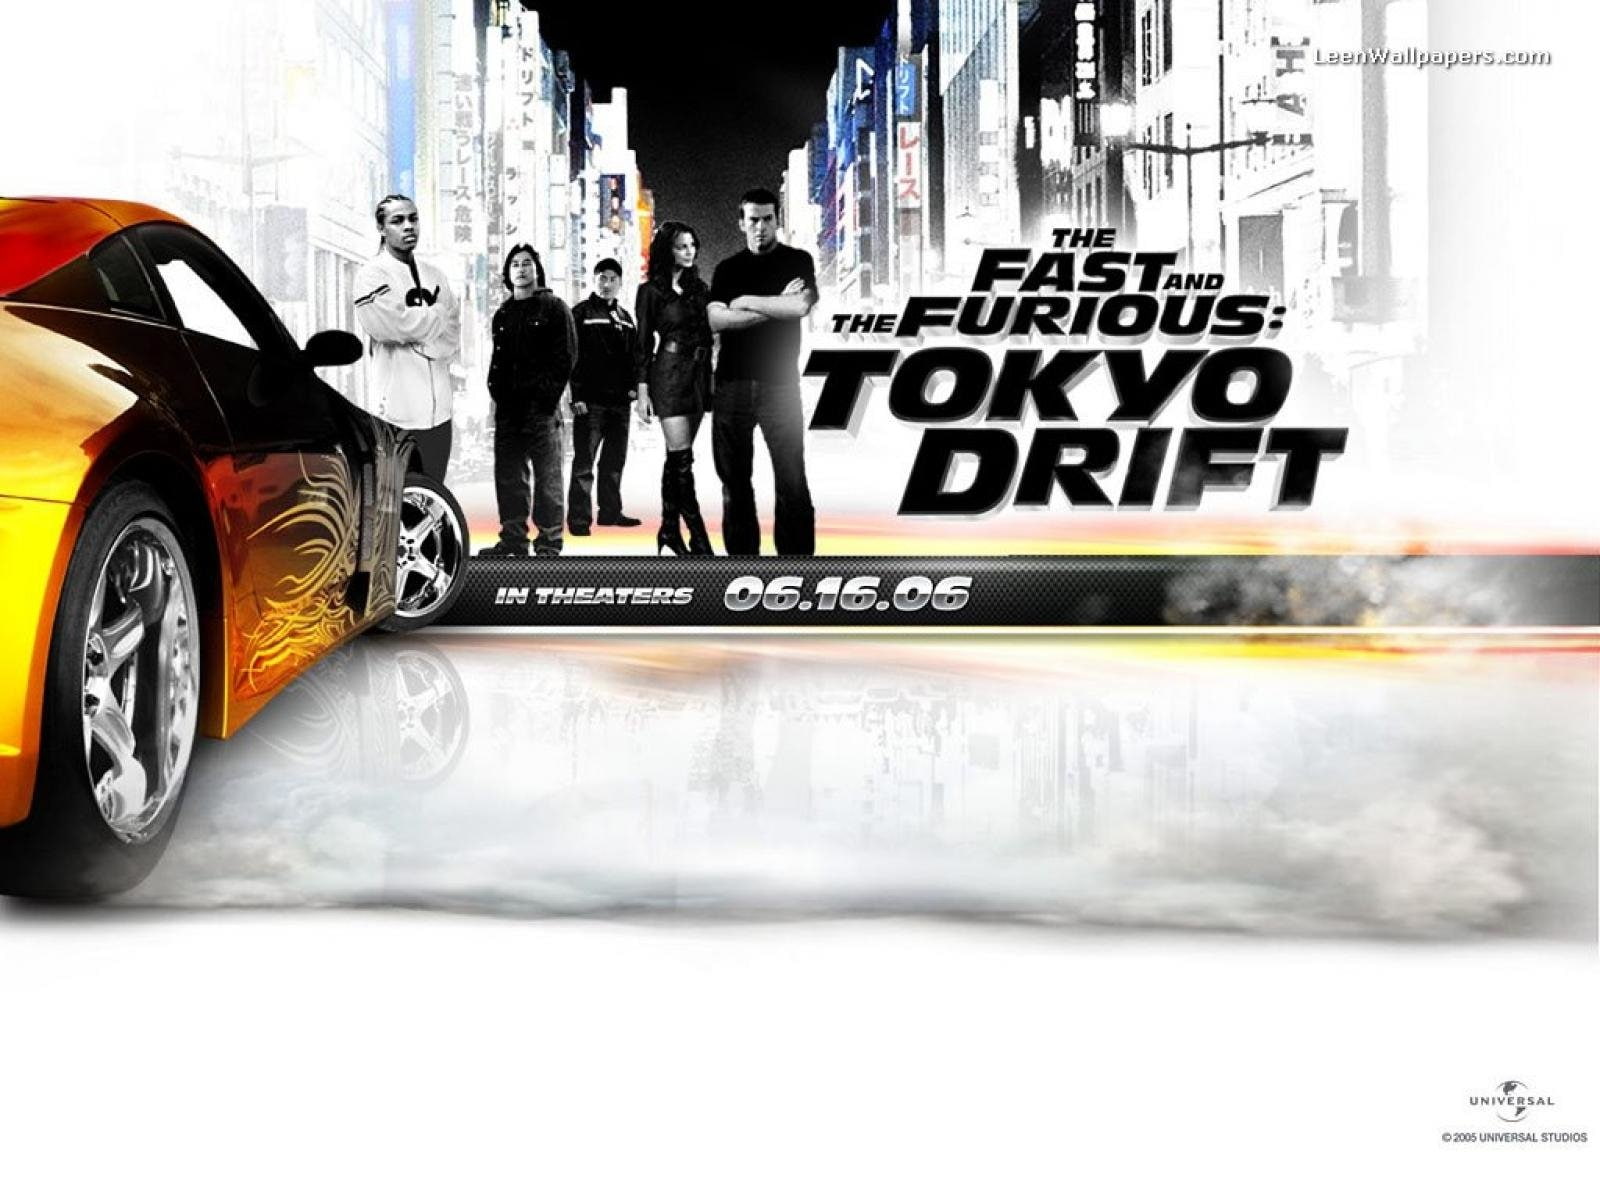 Wallpaper / The Fast And The Furious: Tokyo Drift, Fast and Furious, 720P free download